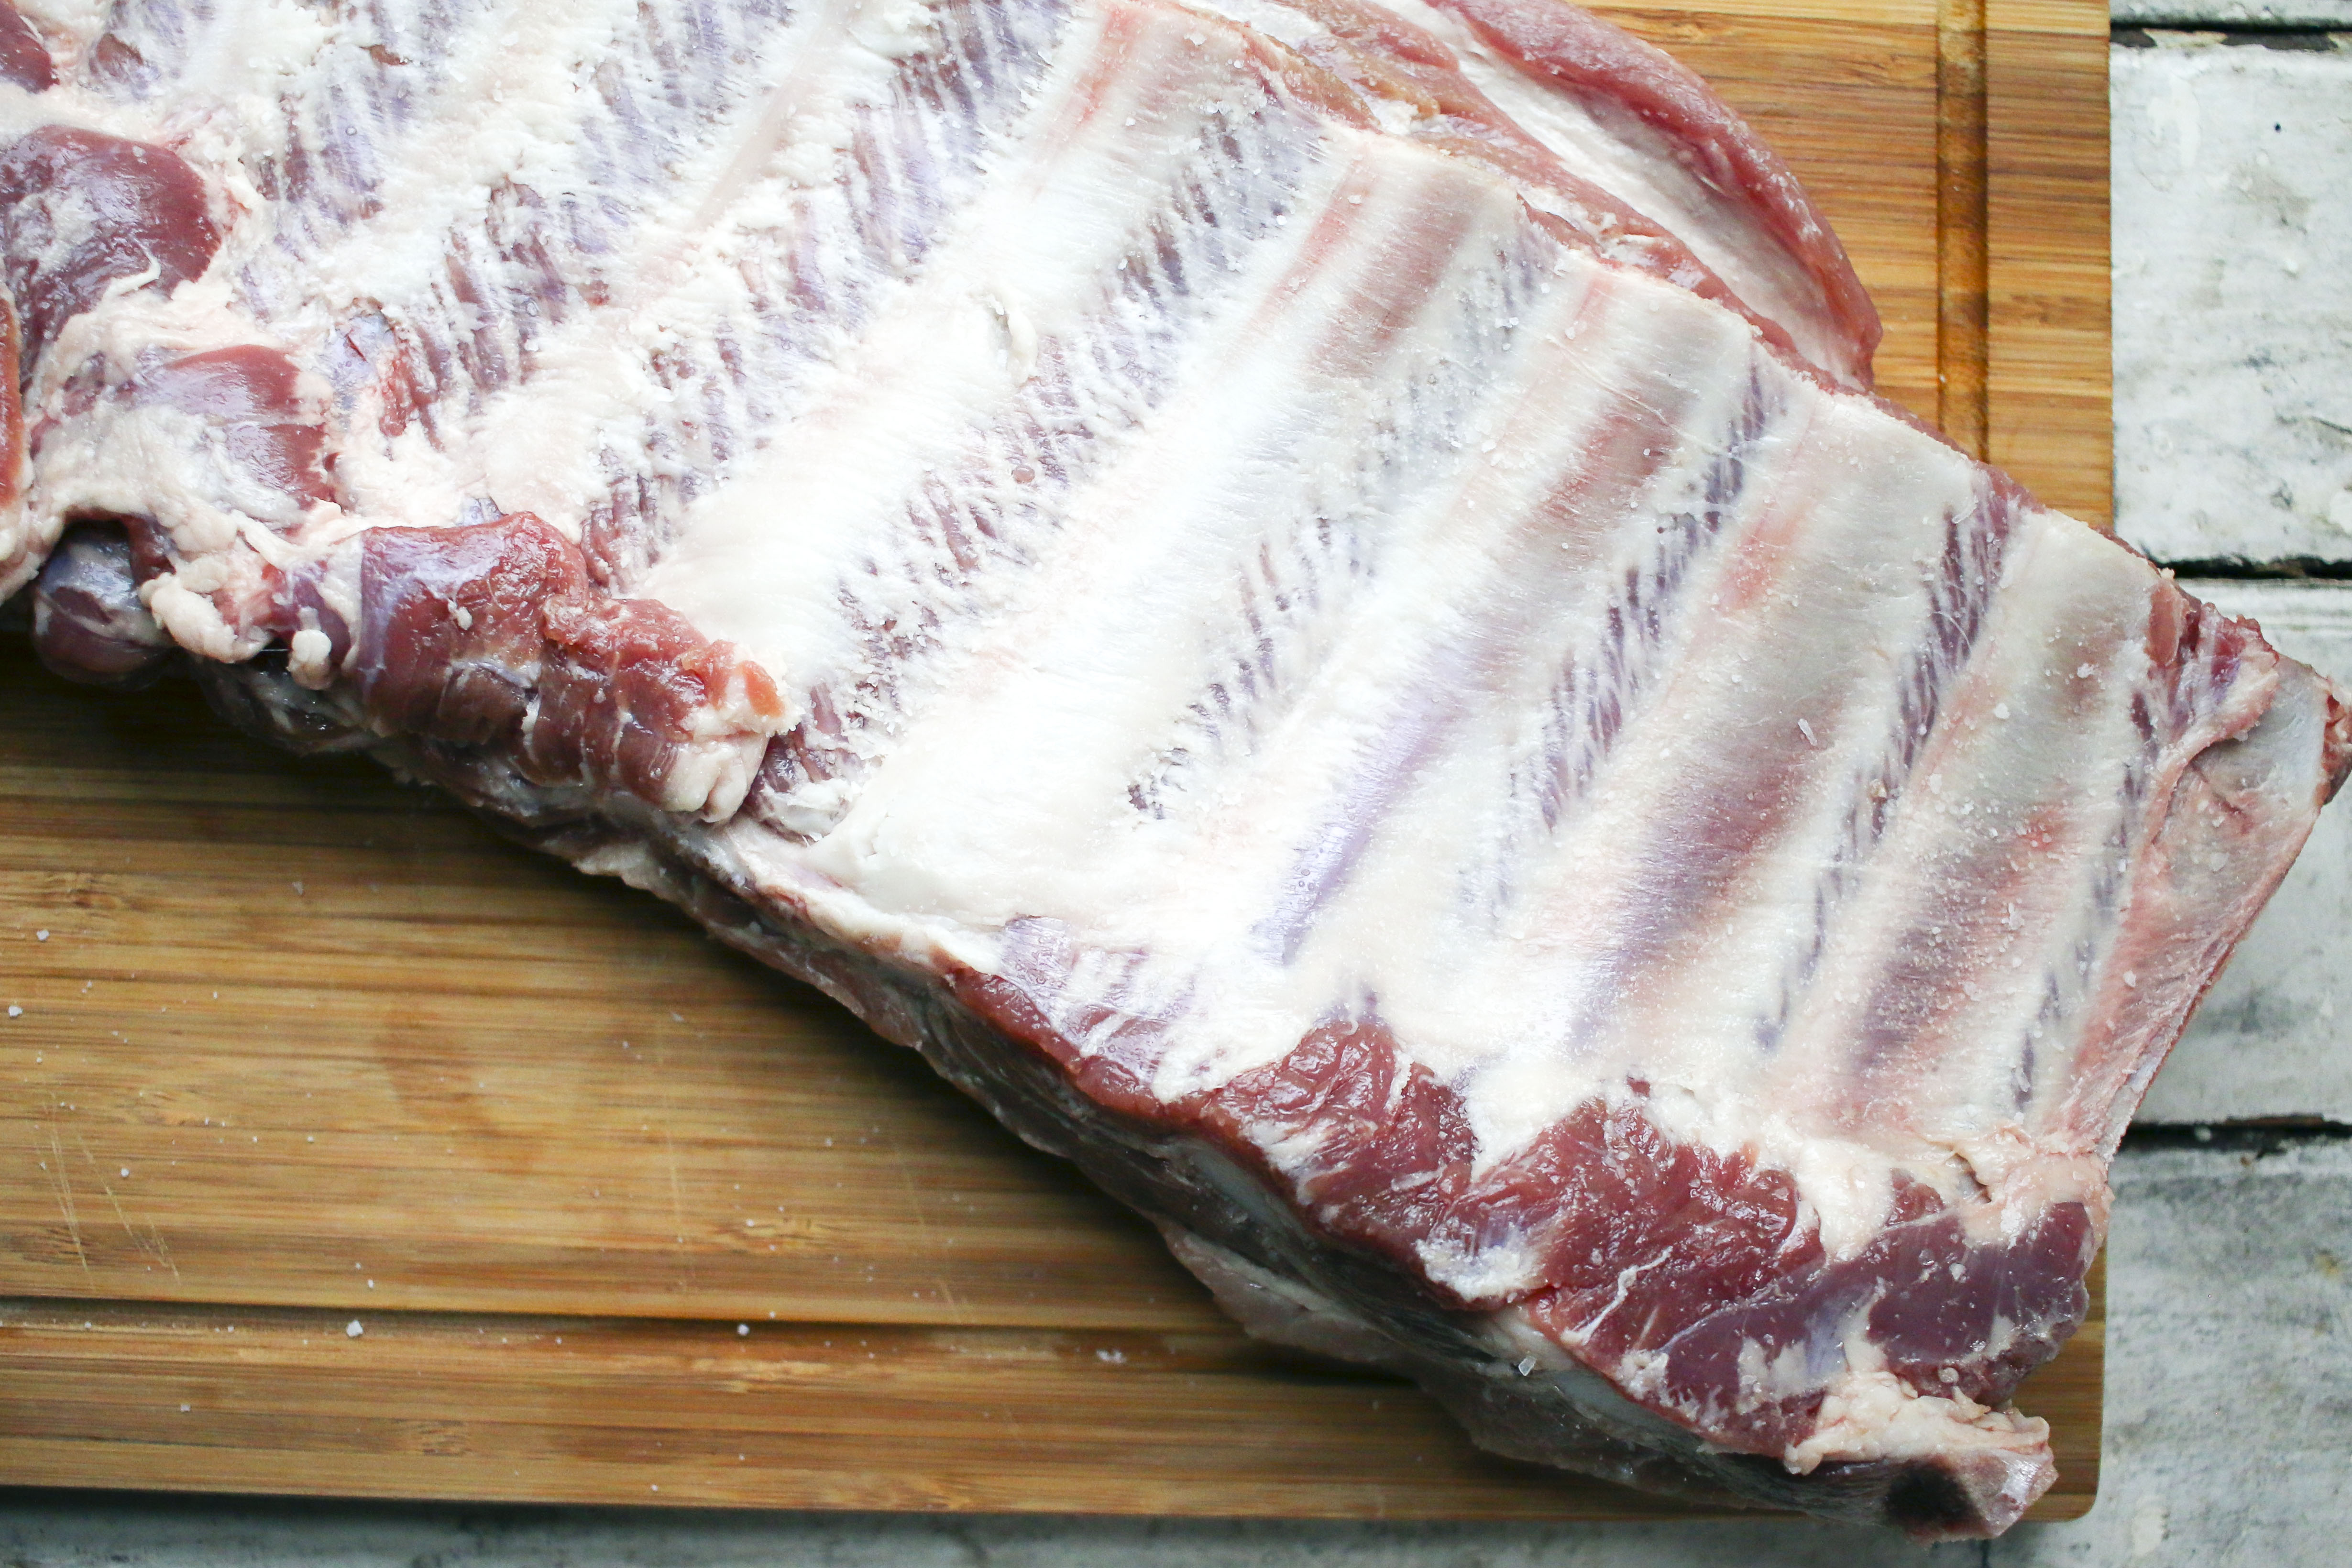 Pomegranate Molasses BBQ Ribs with Smoked Sea Salt | I Will Not Eat Oysters